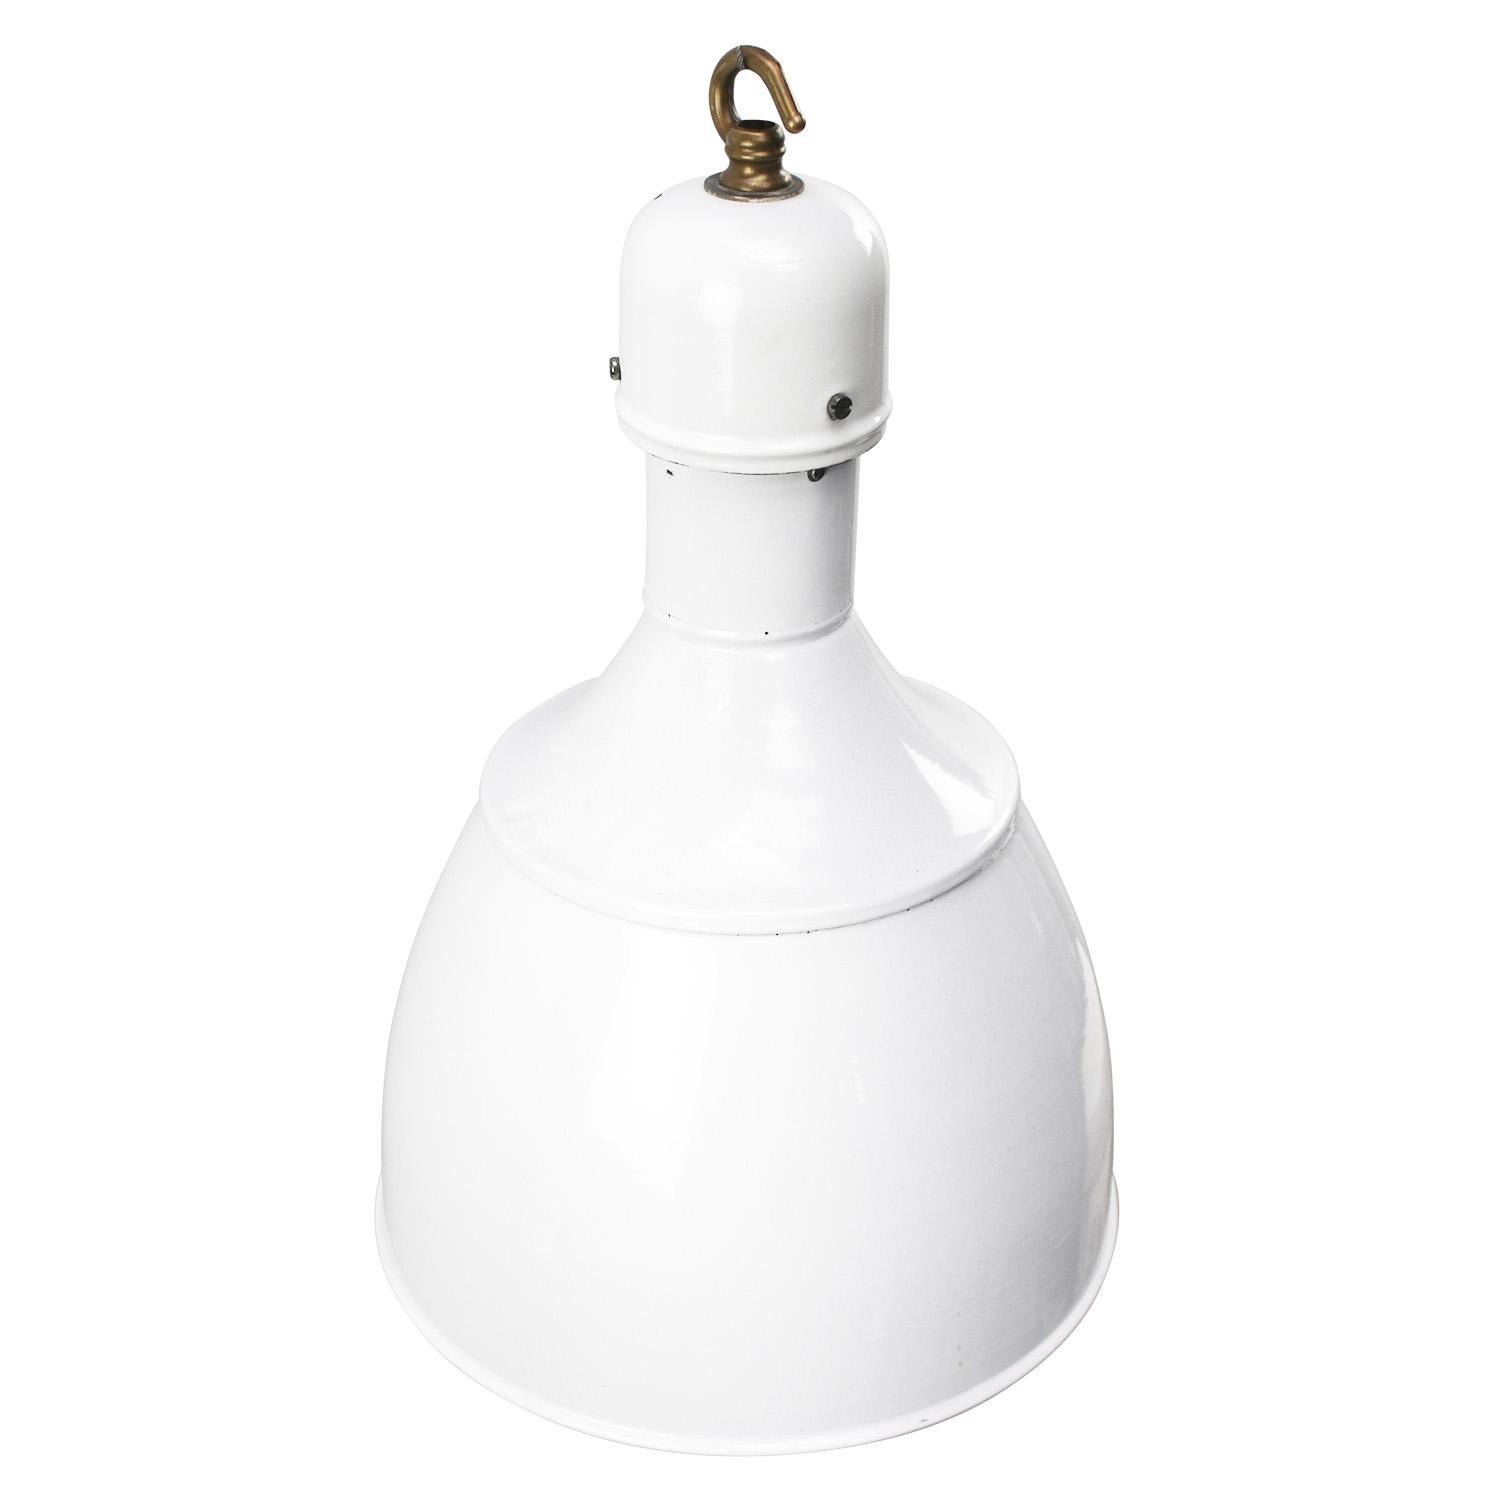 White enamel Factory pedant light
White interior, brass top. New old stock. 

Weight 2.3 kg or 5.1 lb.

Priced per individual item. All lamps have been made suitable by international standards for incandescent light bulbs, energy-efficient and LED